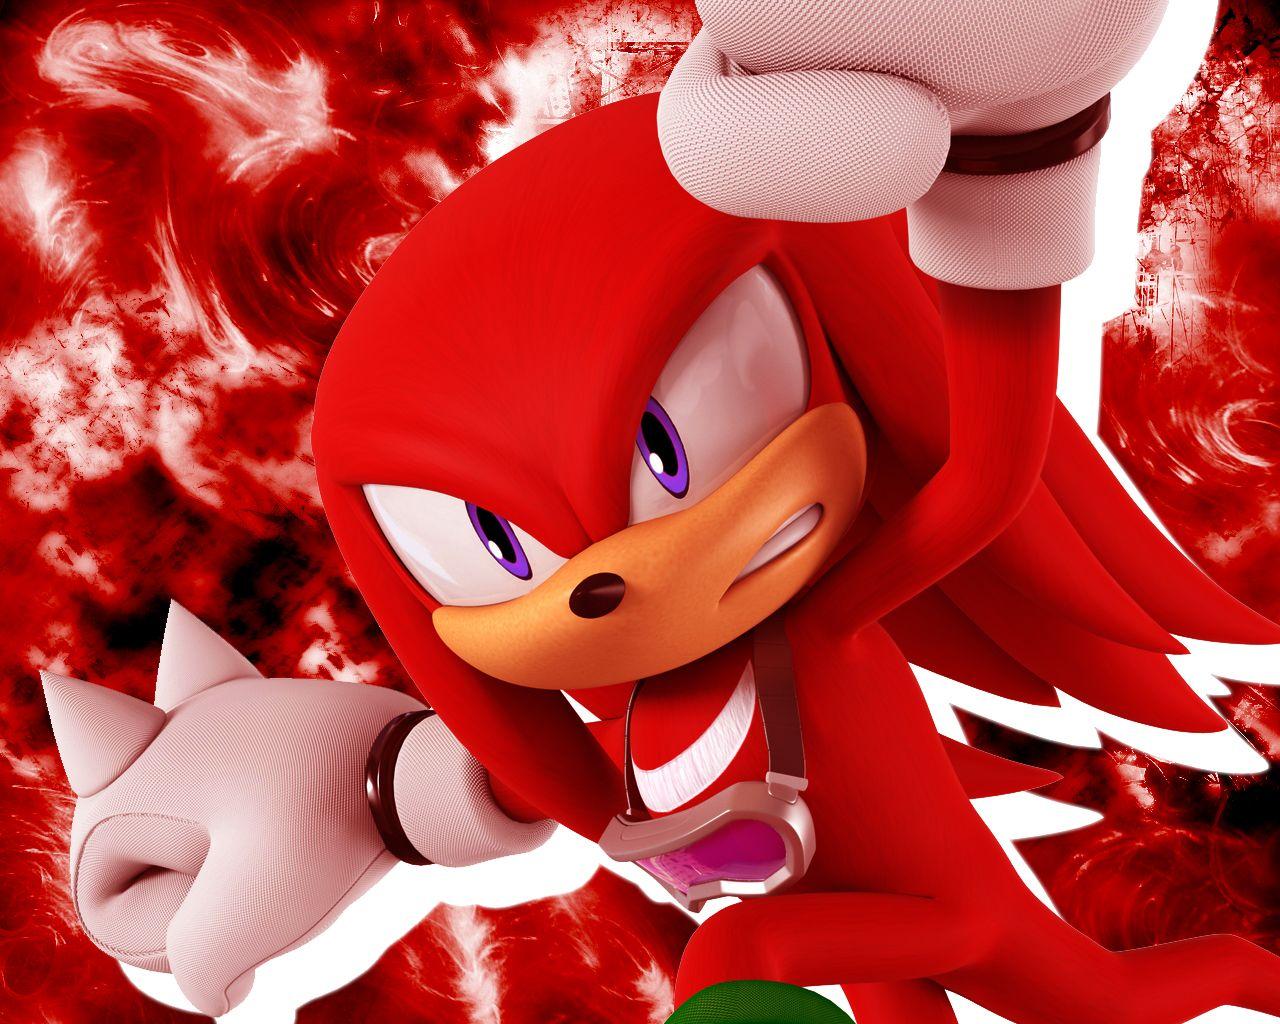 Sonic Knuckles and miles minimal wallpaper  rSonicTheHedgehog